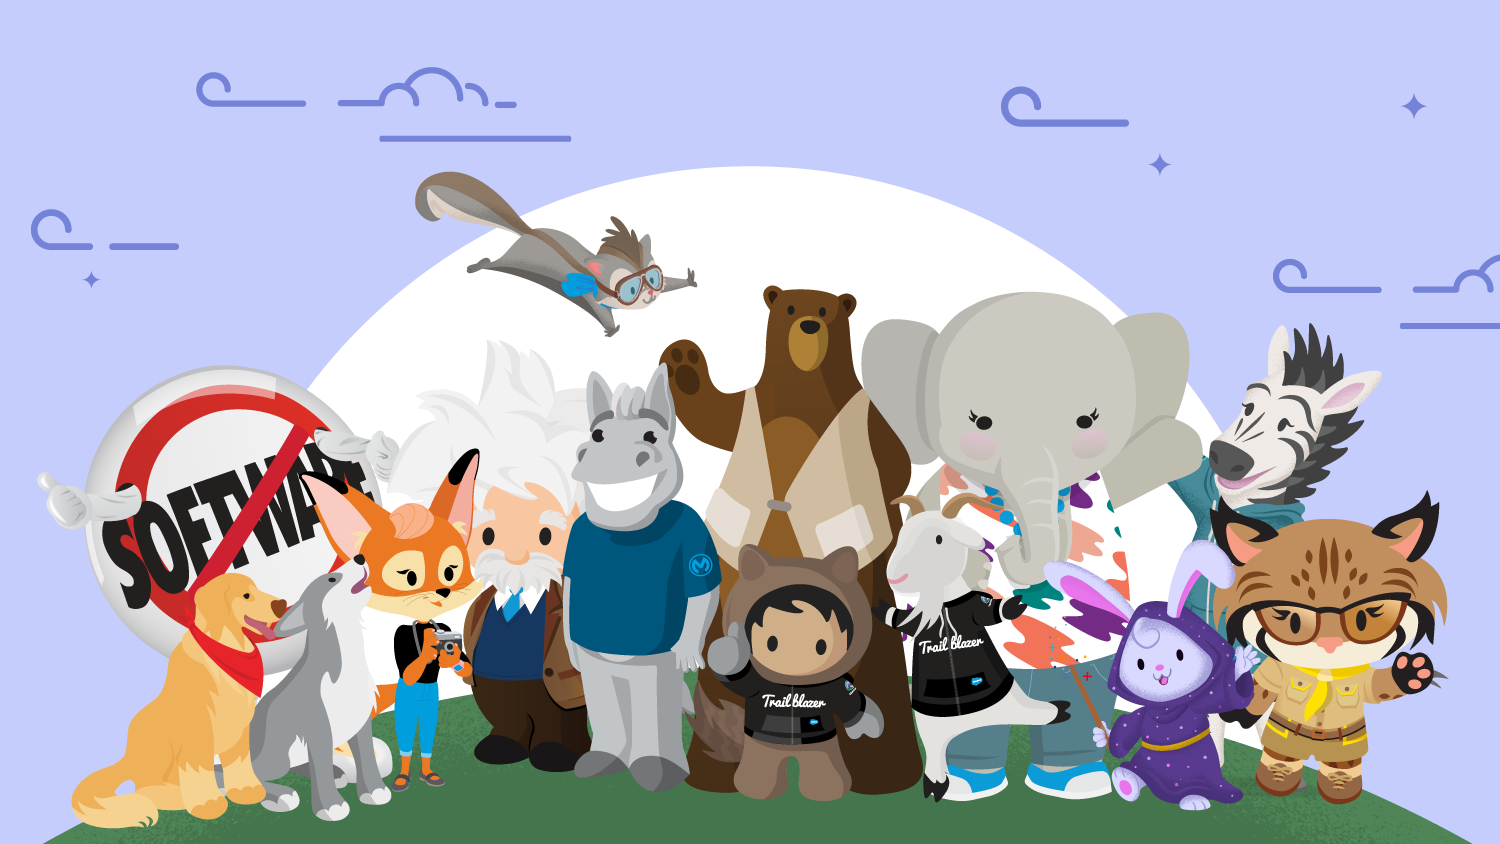 Who Are the Salesforce Characters? Get to Know Astro and Friends